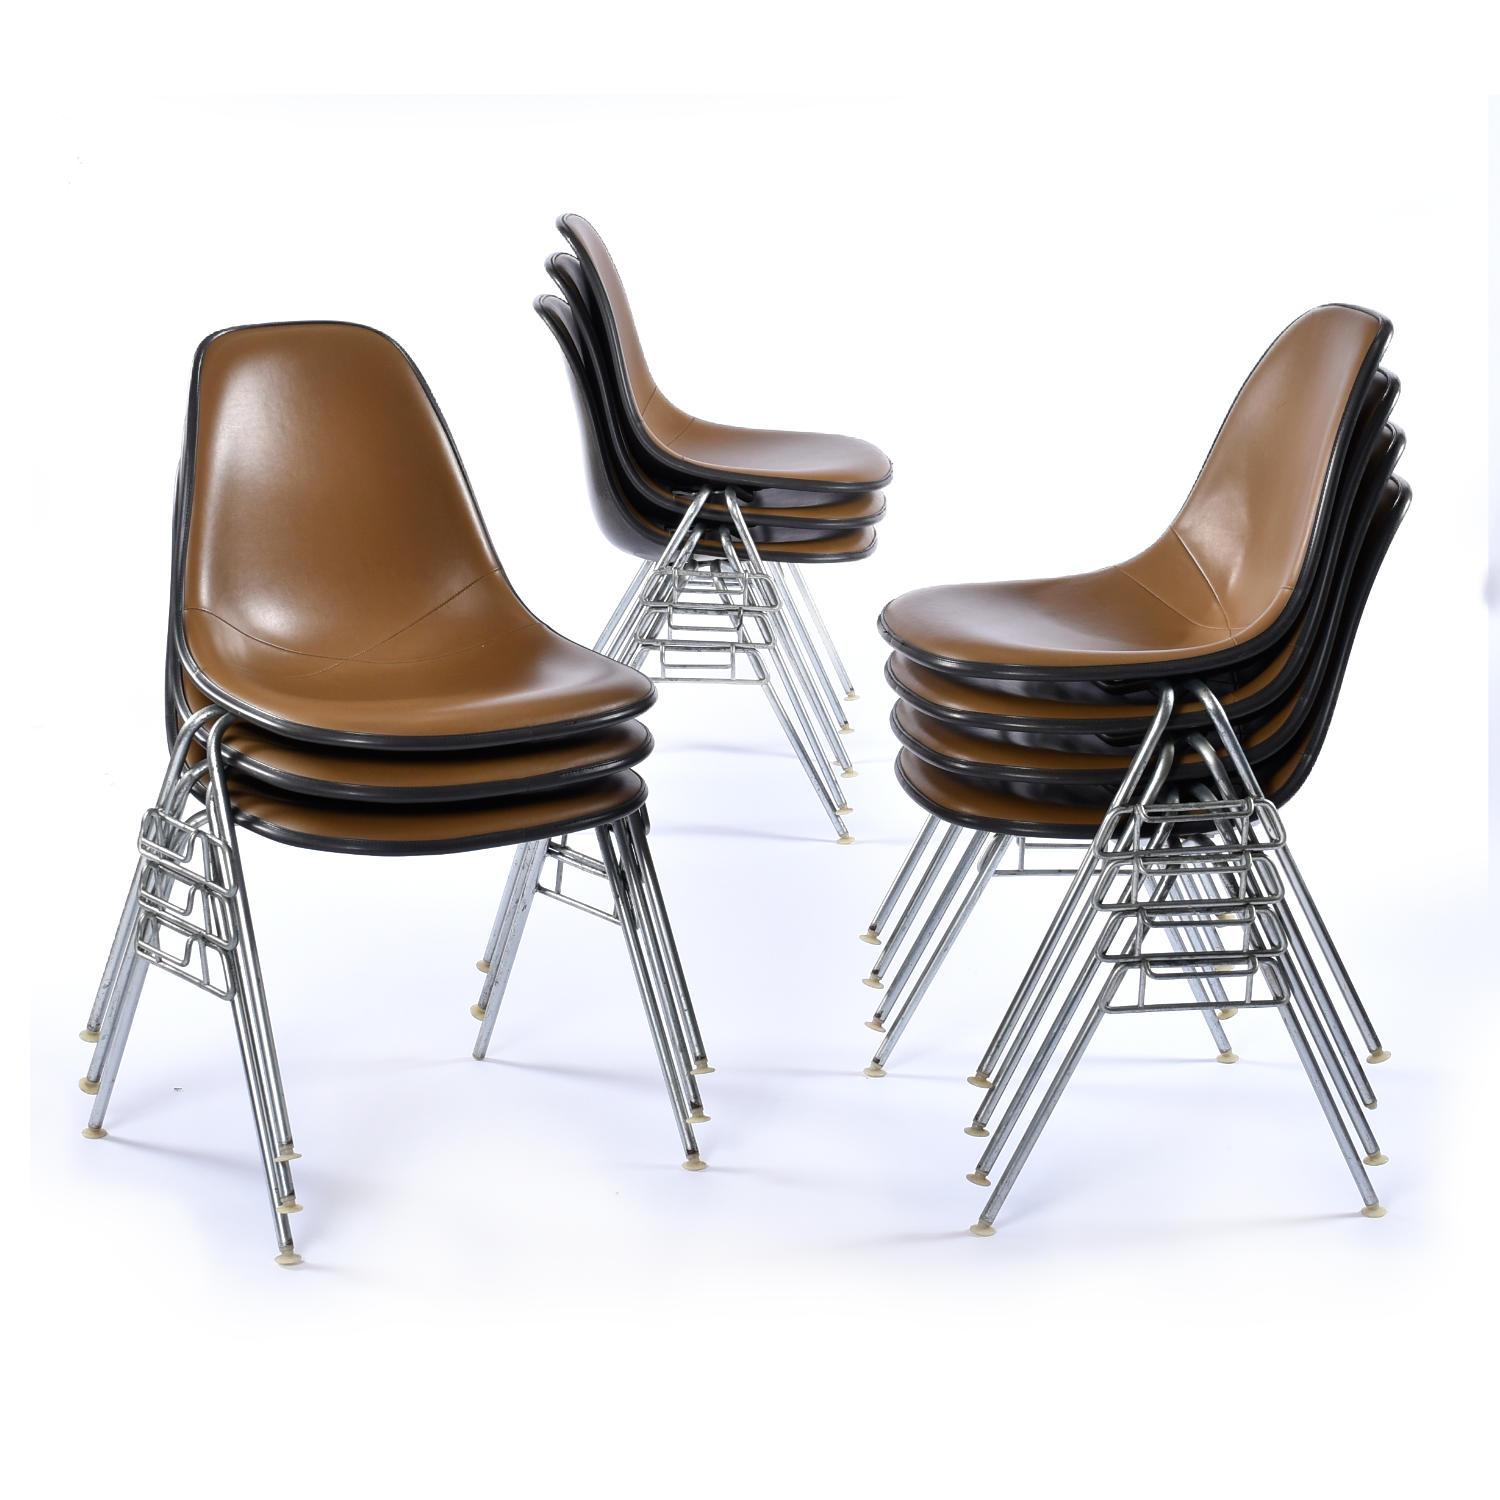 Sold as a group of 6. We have 20 individual chairs available. Contact us if you need a custom quantity.

Eames stackable fiberglass shell chairs with original brown naugahyde pads. The famous Charles and Ray Eames fiberglass shell chairs are